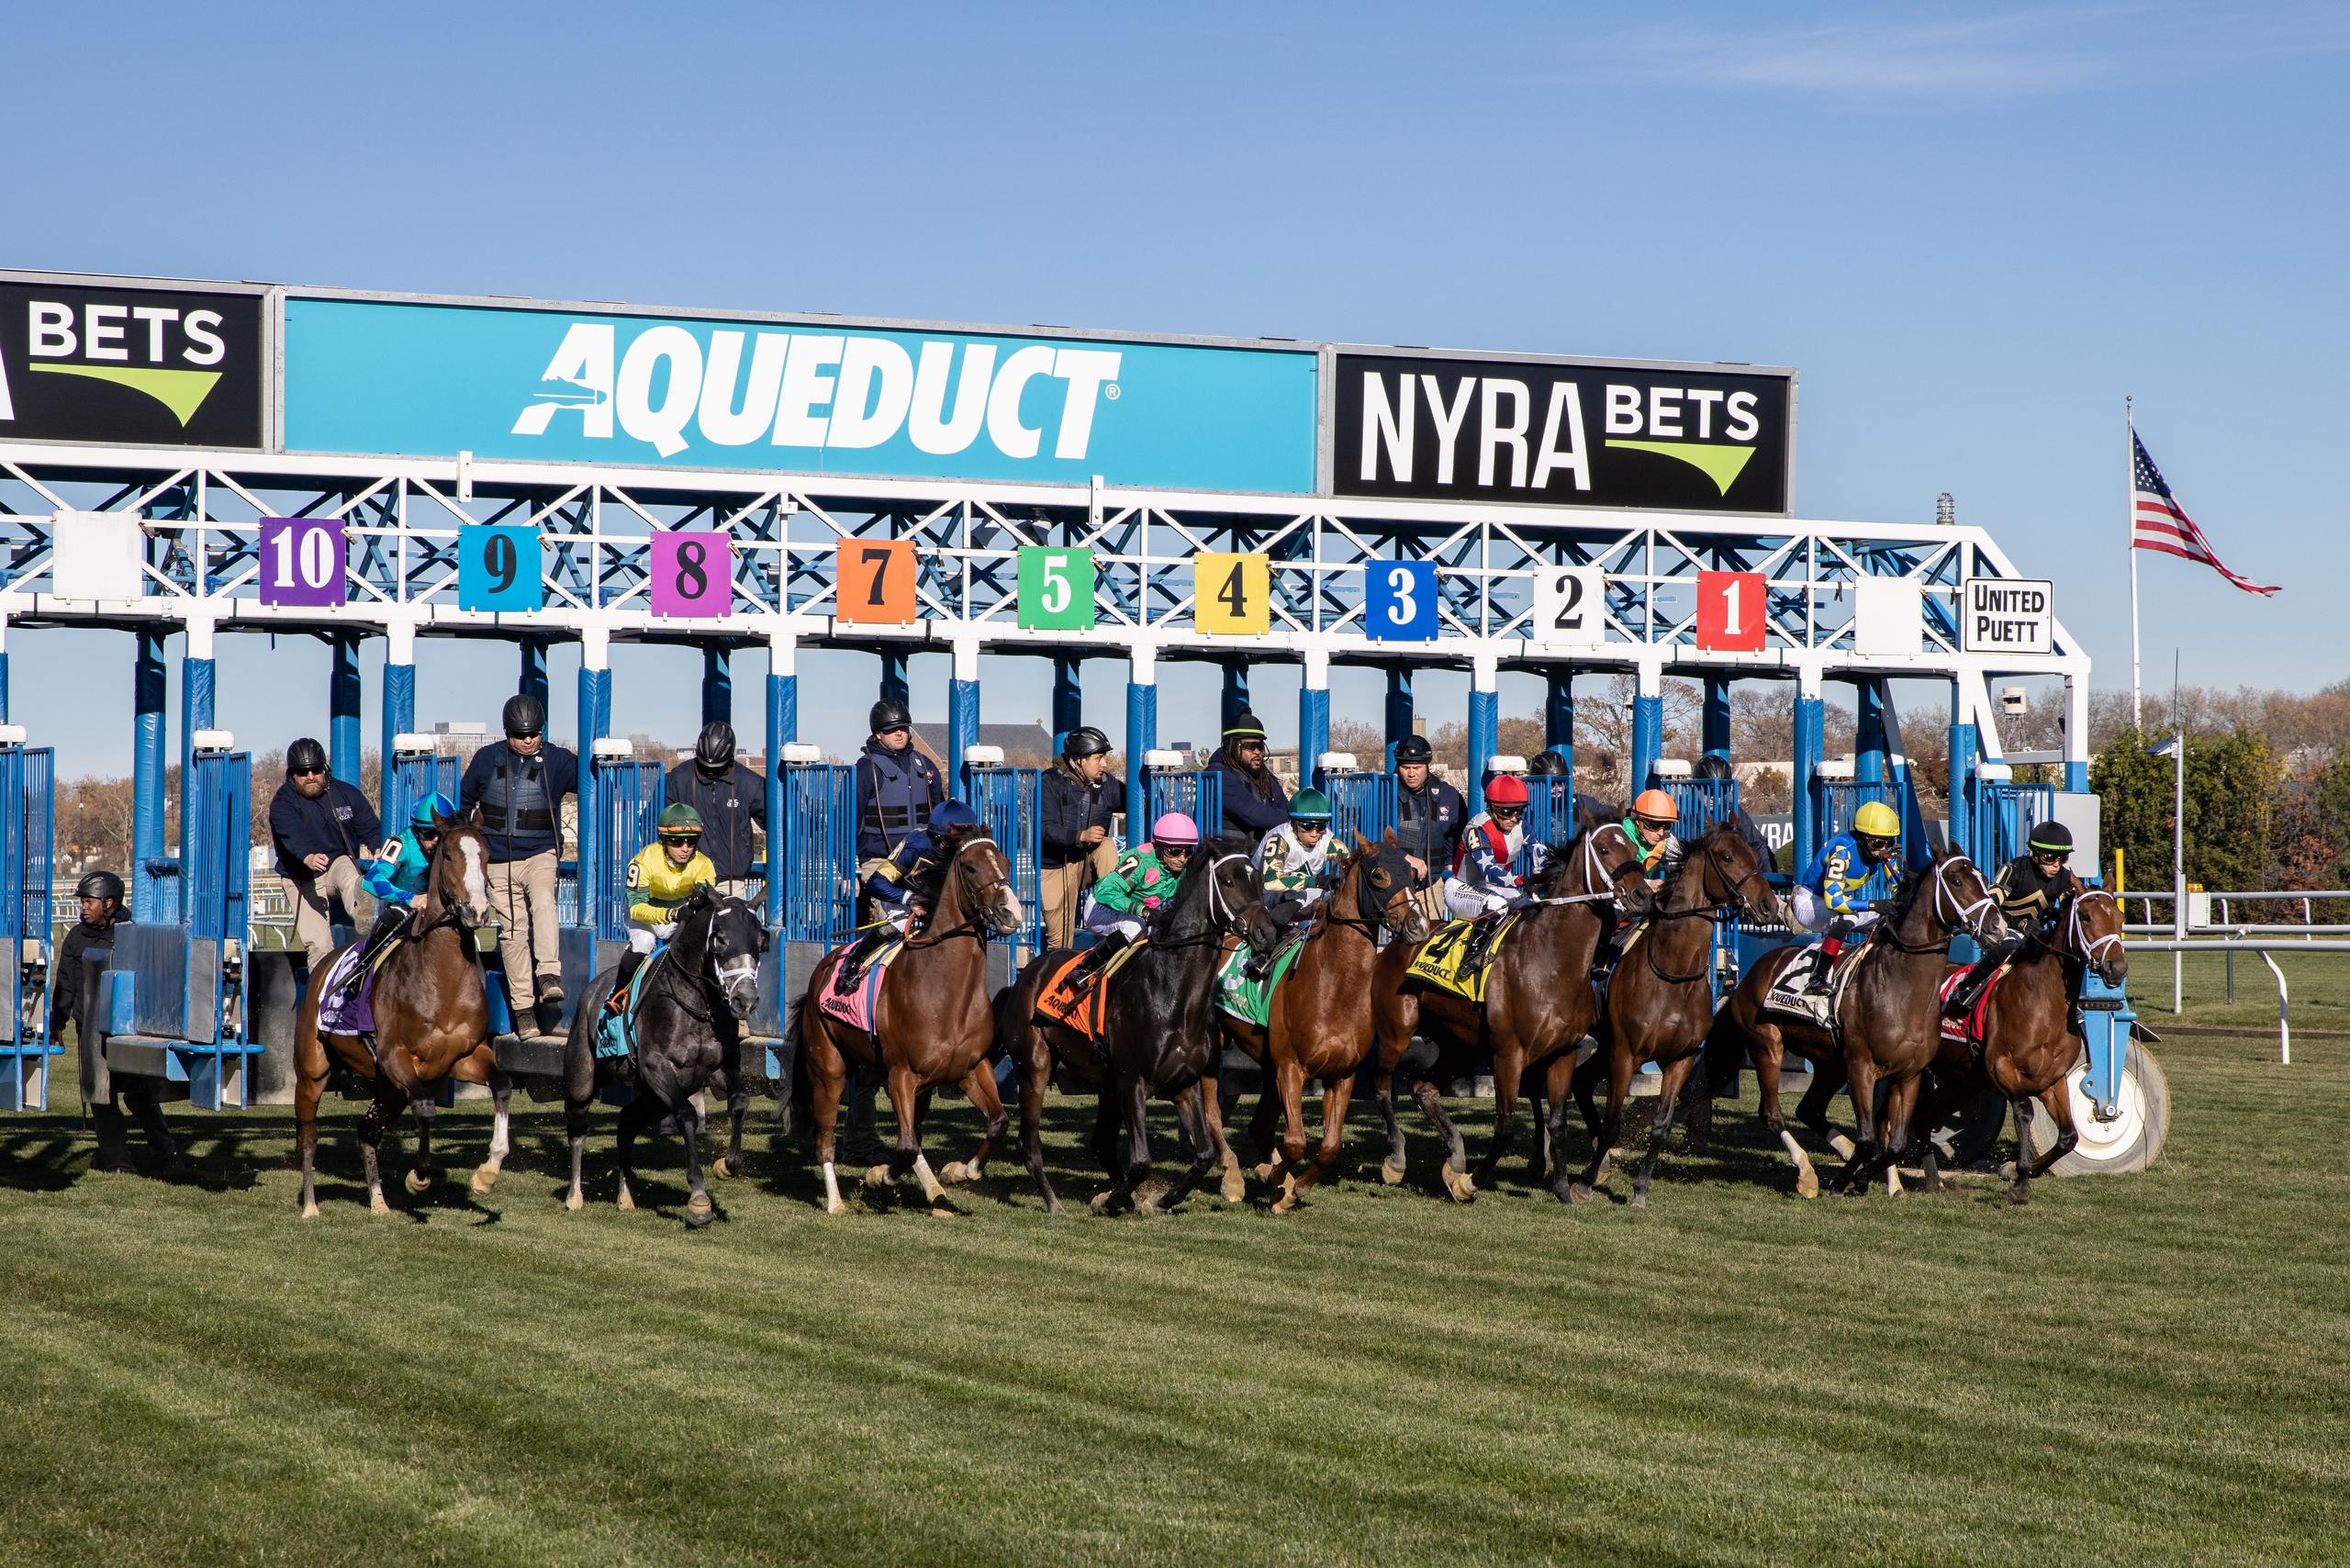 horse racing at Aqueduct race track in Queens, New York.